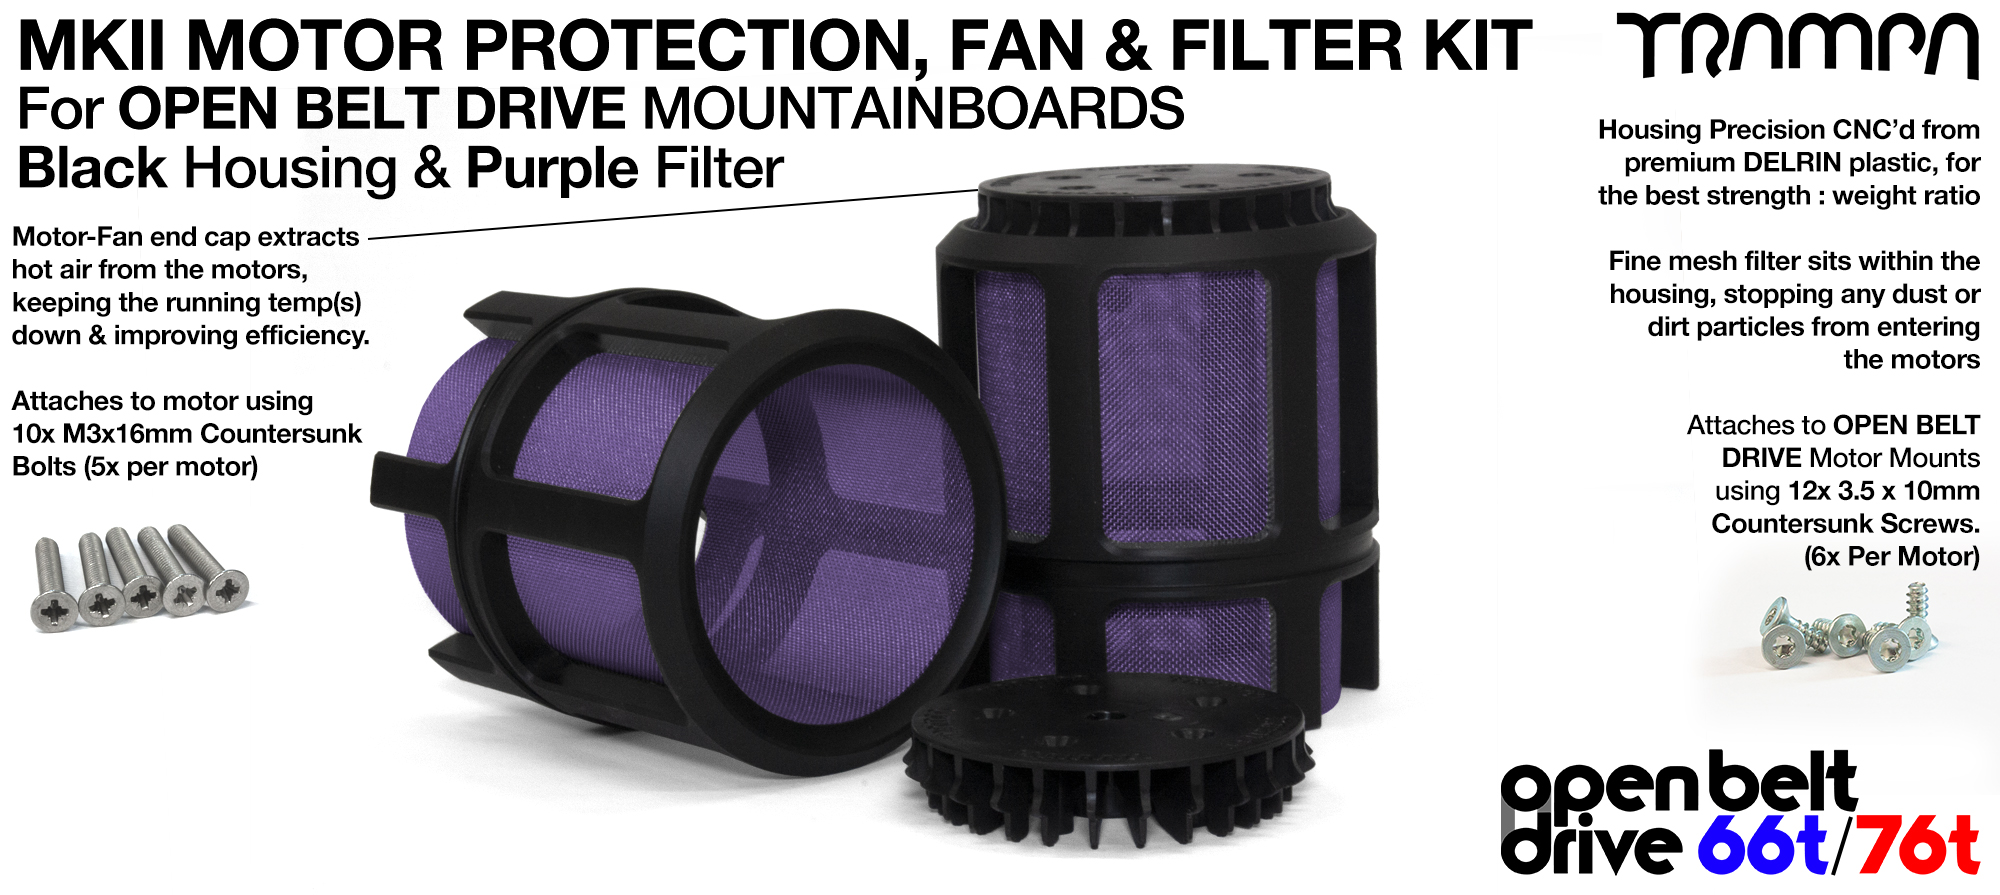 FULL CAGE Motor protection SUPER STRONG DELRIN Plastic includes Fan & PURPLE Filter - TWIN